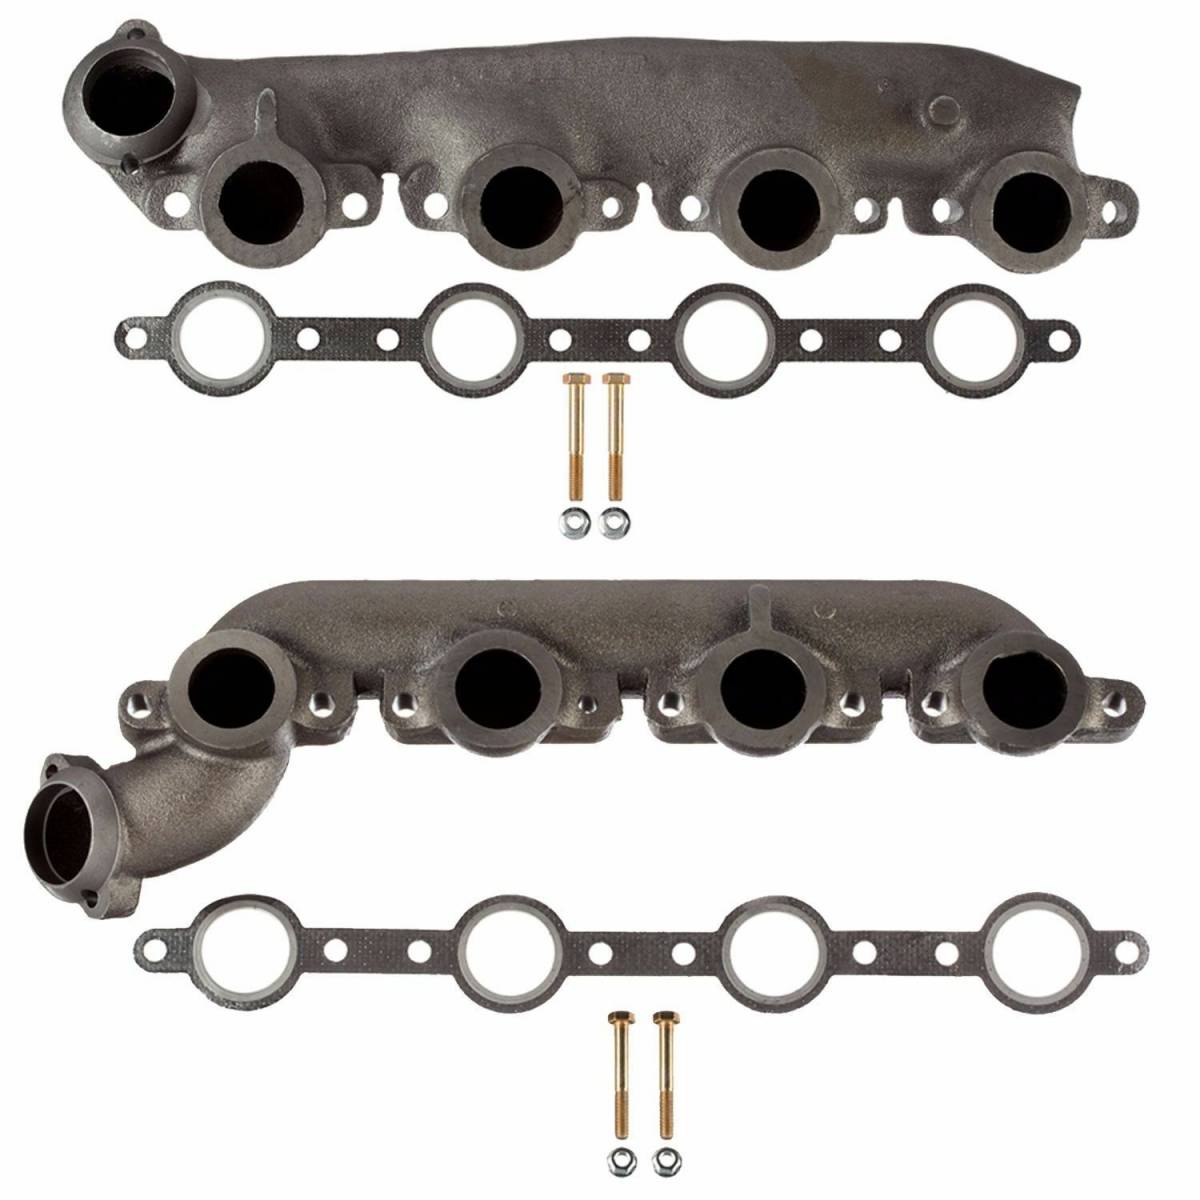 Rudy's Replacement Exhaust Manifold Kit For 99-03 7.3 Powerstroke